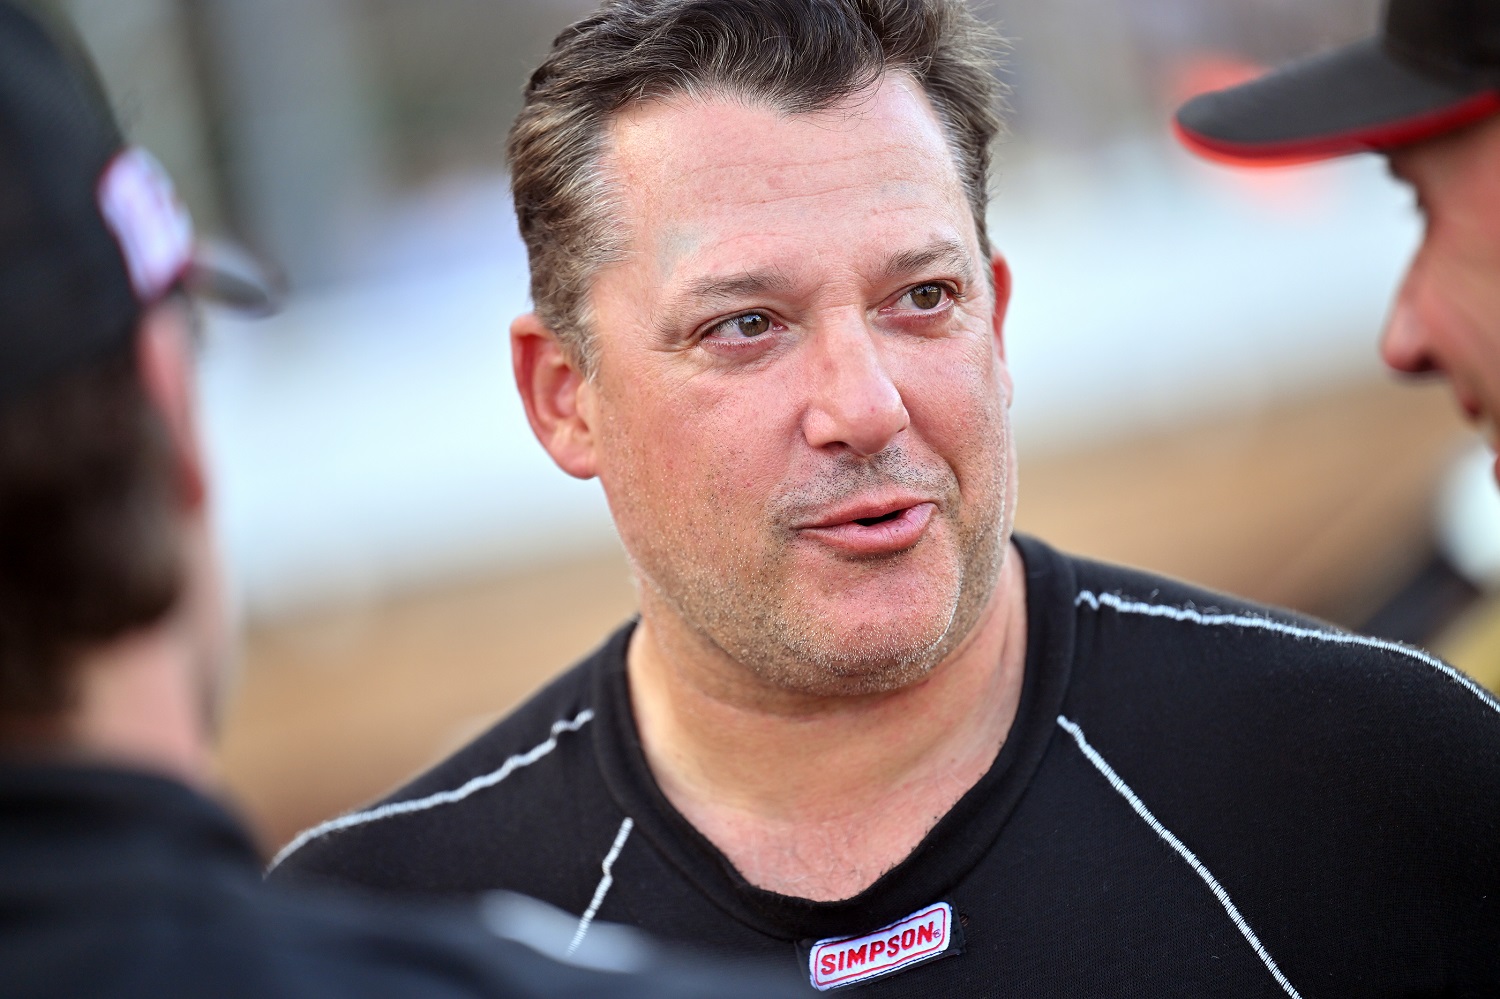 Tony Stewart talks to other drivers prior to the SRX qualifying race at Sharon Speedway on July 23, 2022 in Hartford, Ohio. | Jason Miller/SRX/Getty Images